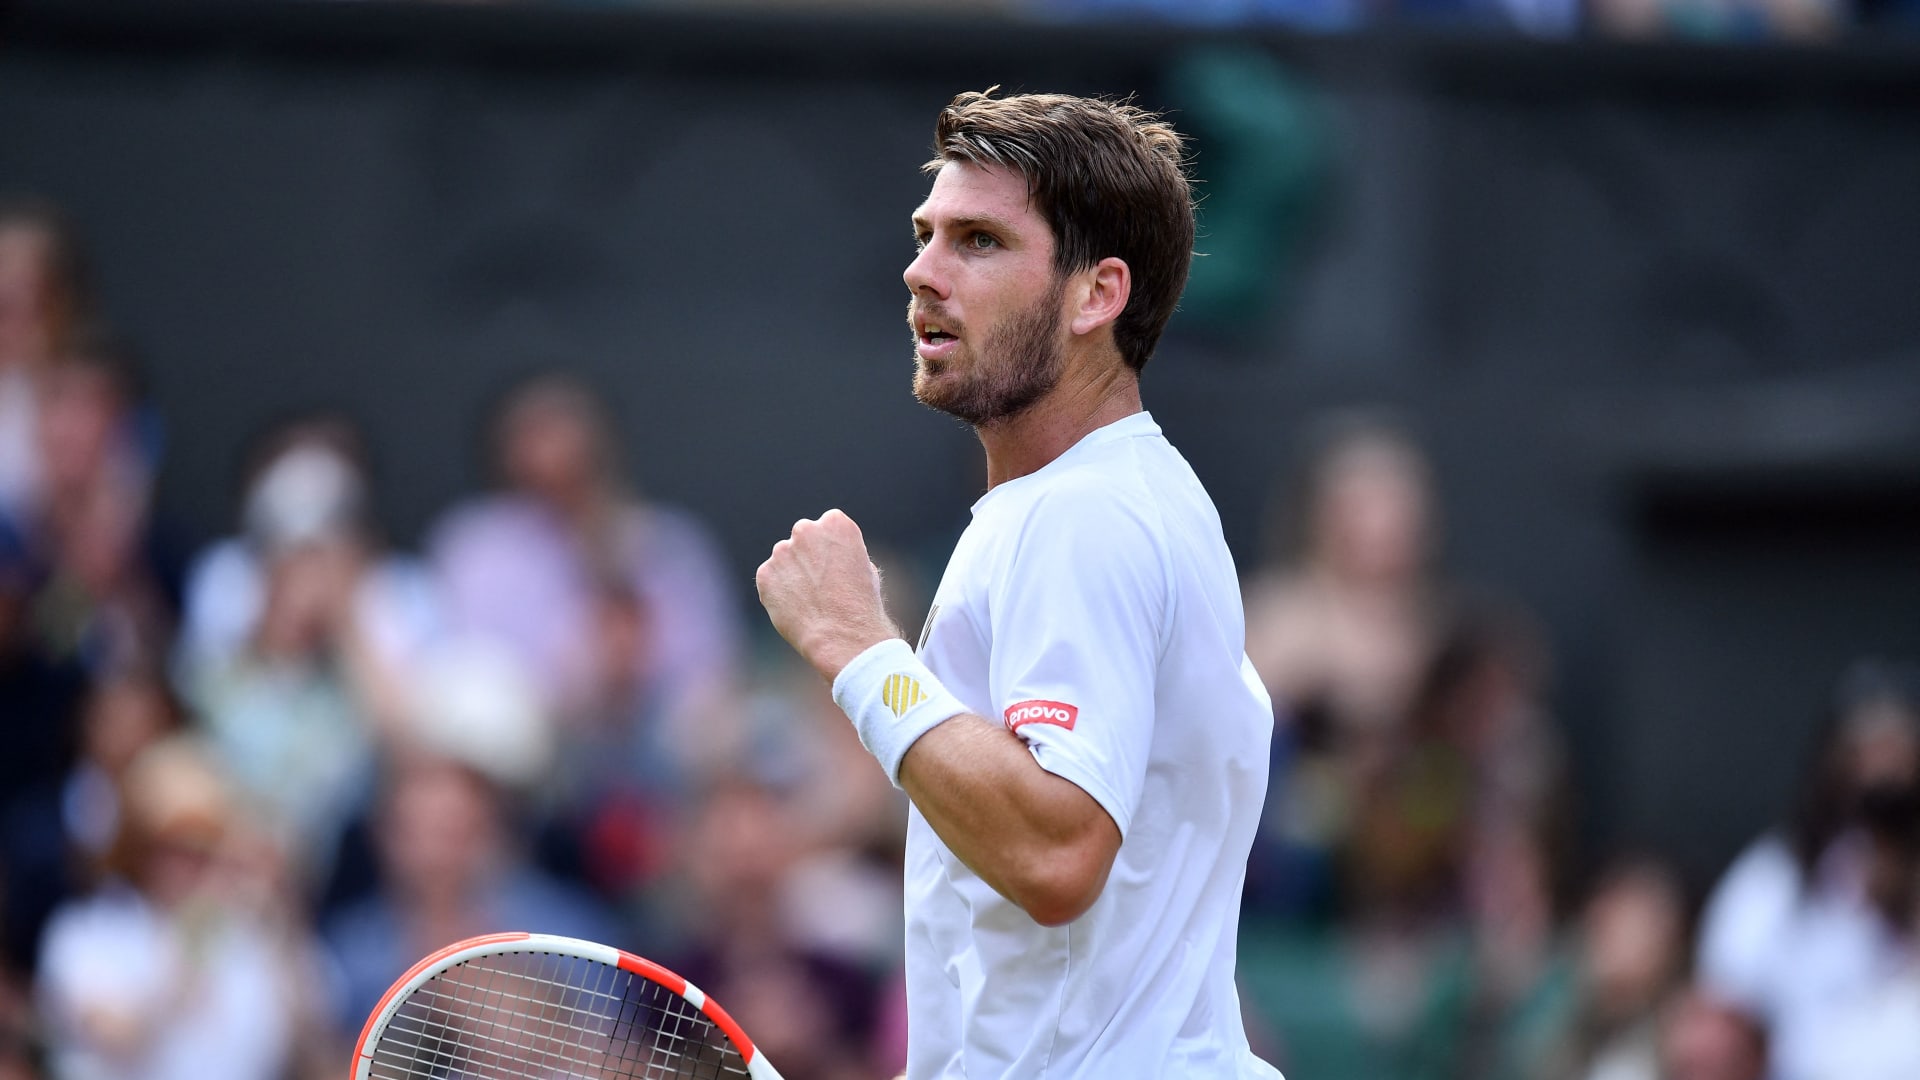 Top seed in Los Cabos, Cameron Norrie opts out of Olympics in favor of hard-court momentum